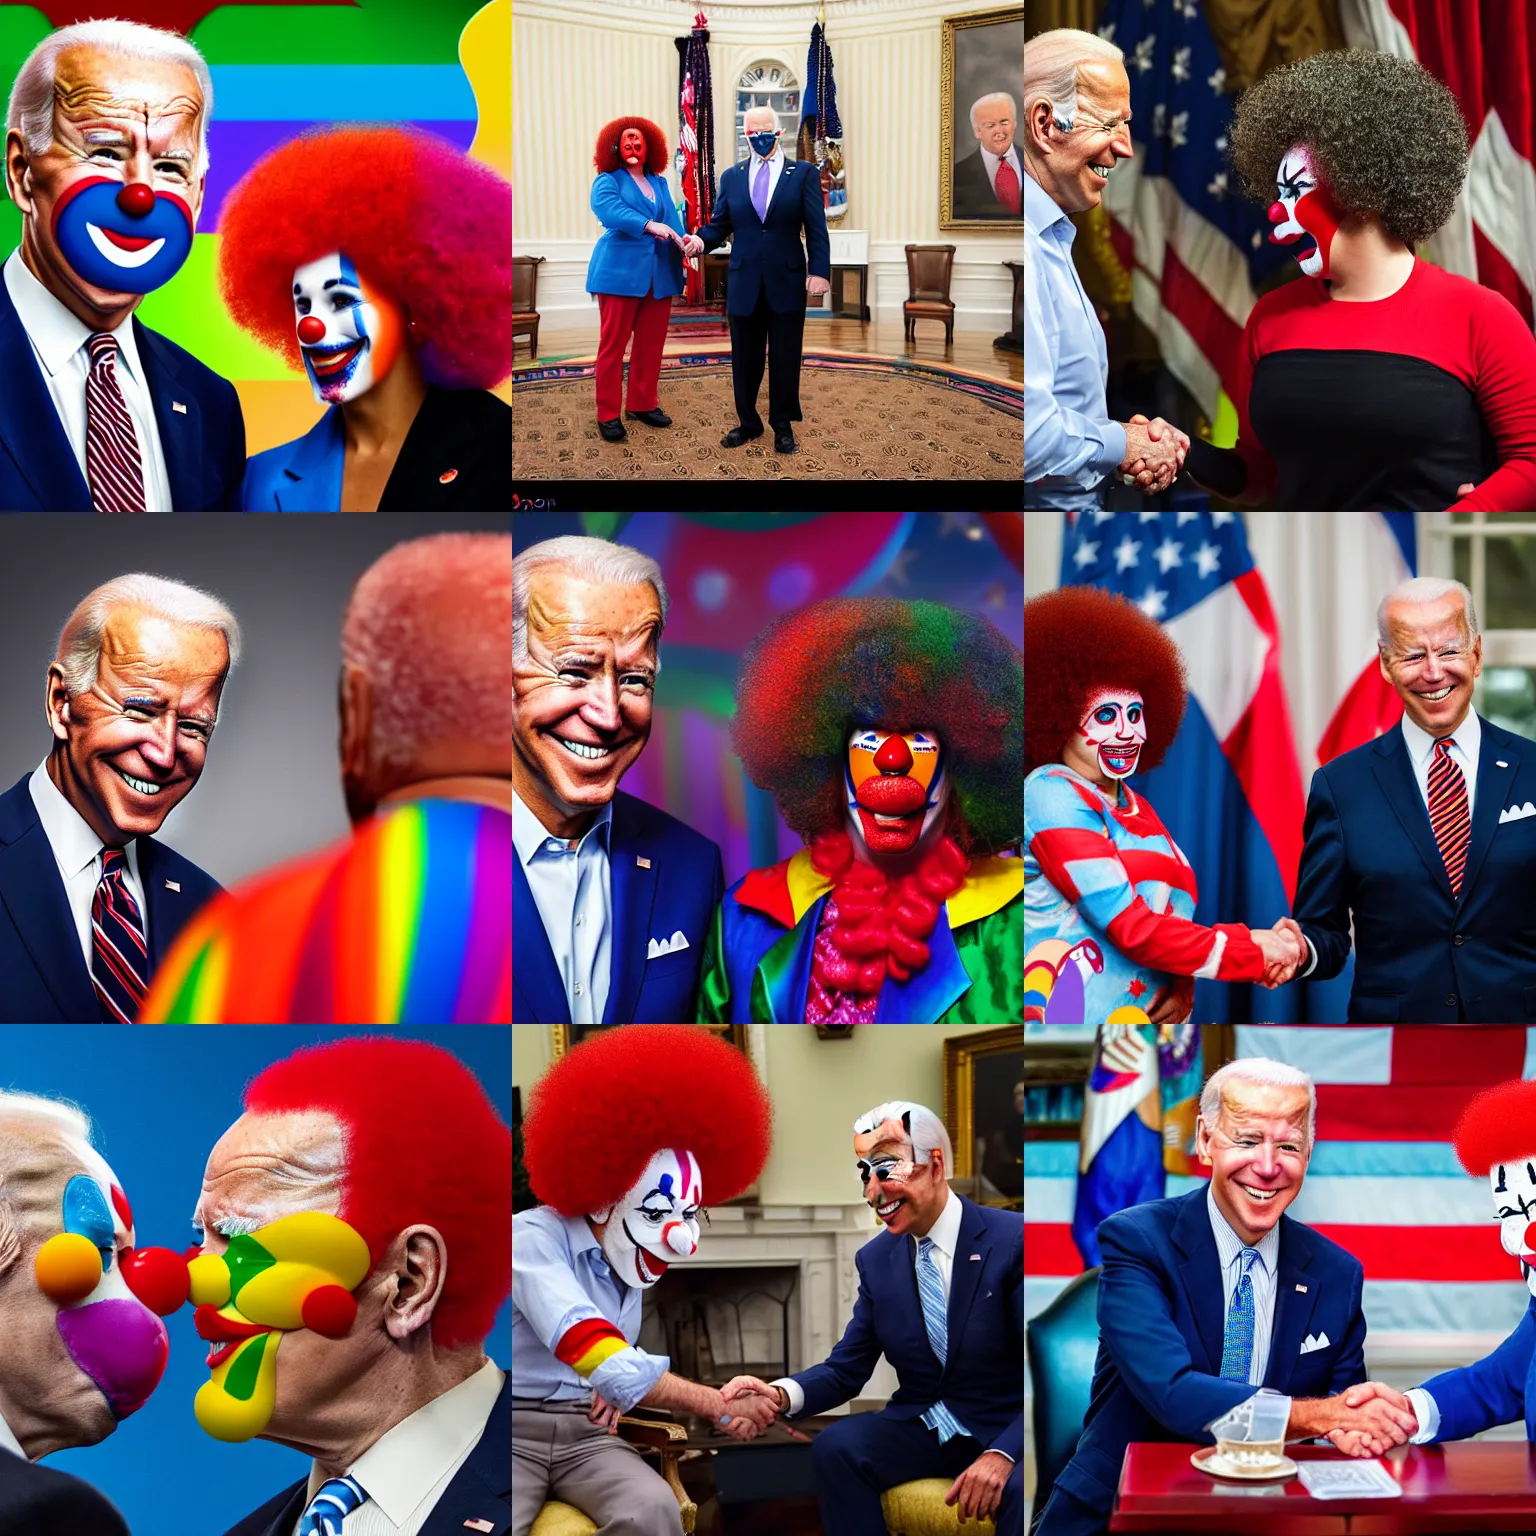 Prompt: headshot of Joe Biden with red clown nose and rainbow clown afro as the president of the united shaking someones hand, EOS-1D, f/1.4, ISO 200, 1/160s, 8K, RAW, unedited, symmetrical balance, in-frame, Photoshop, Nvidia, Topaz AI